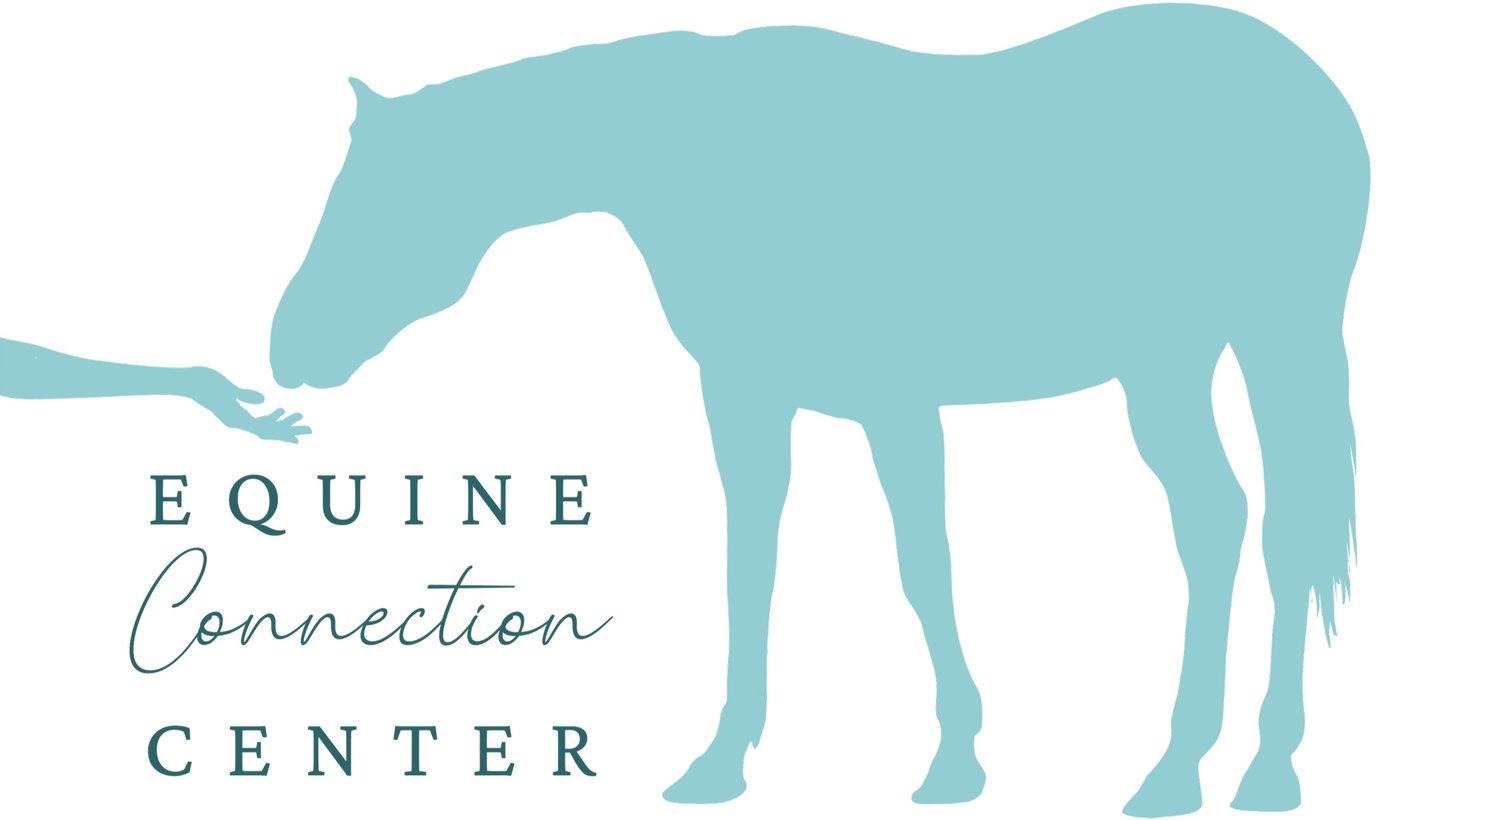 Equine Connection Center